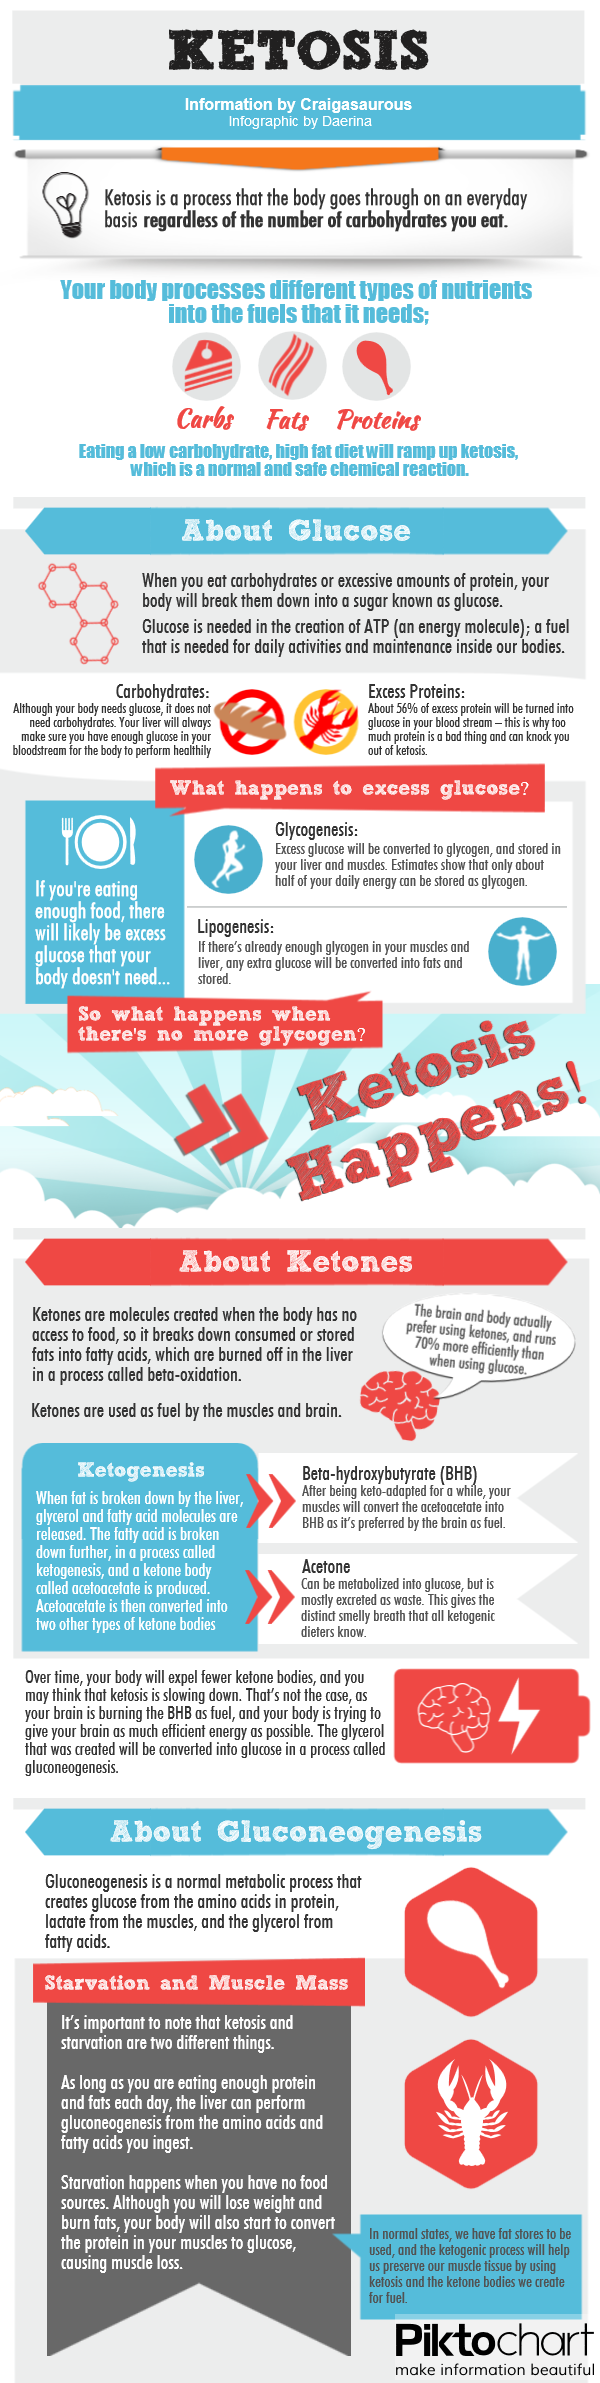 keto diet inforgraphic.  Really good introduction to Ketogenic diet